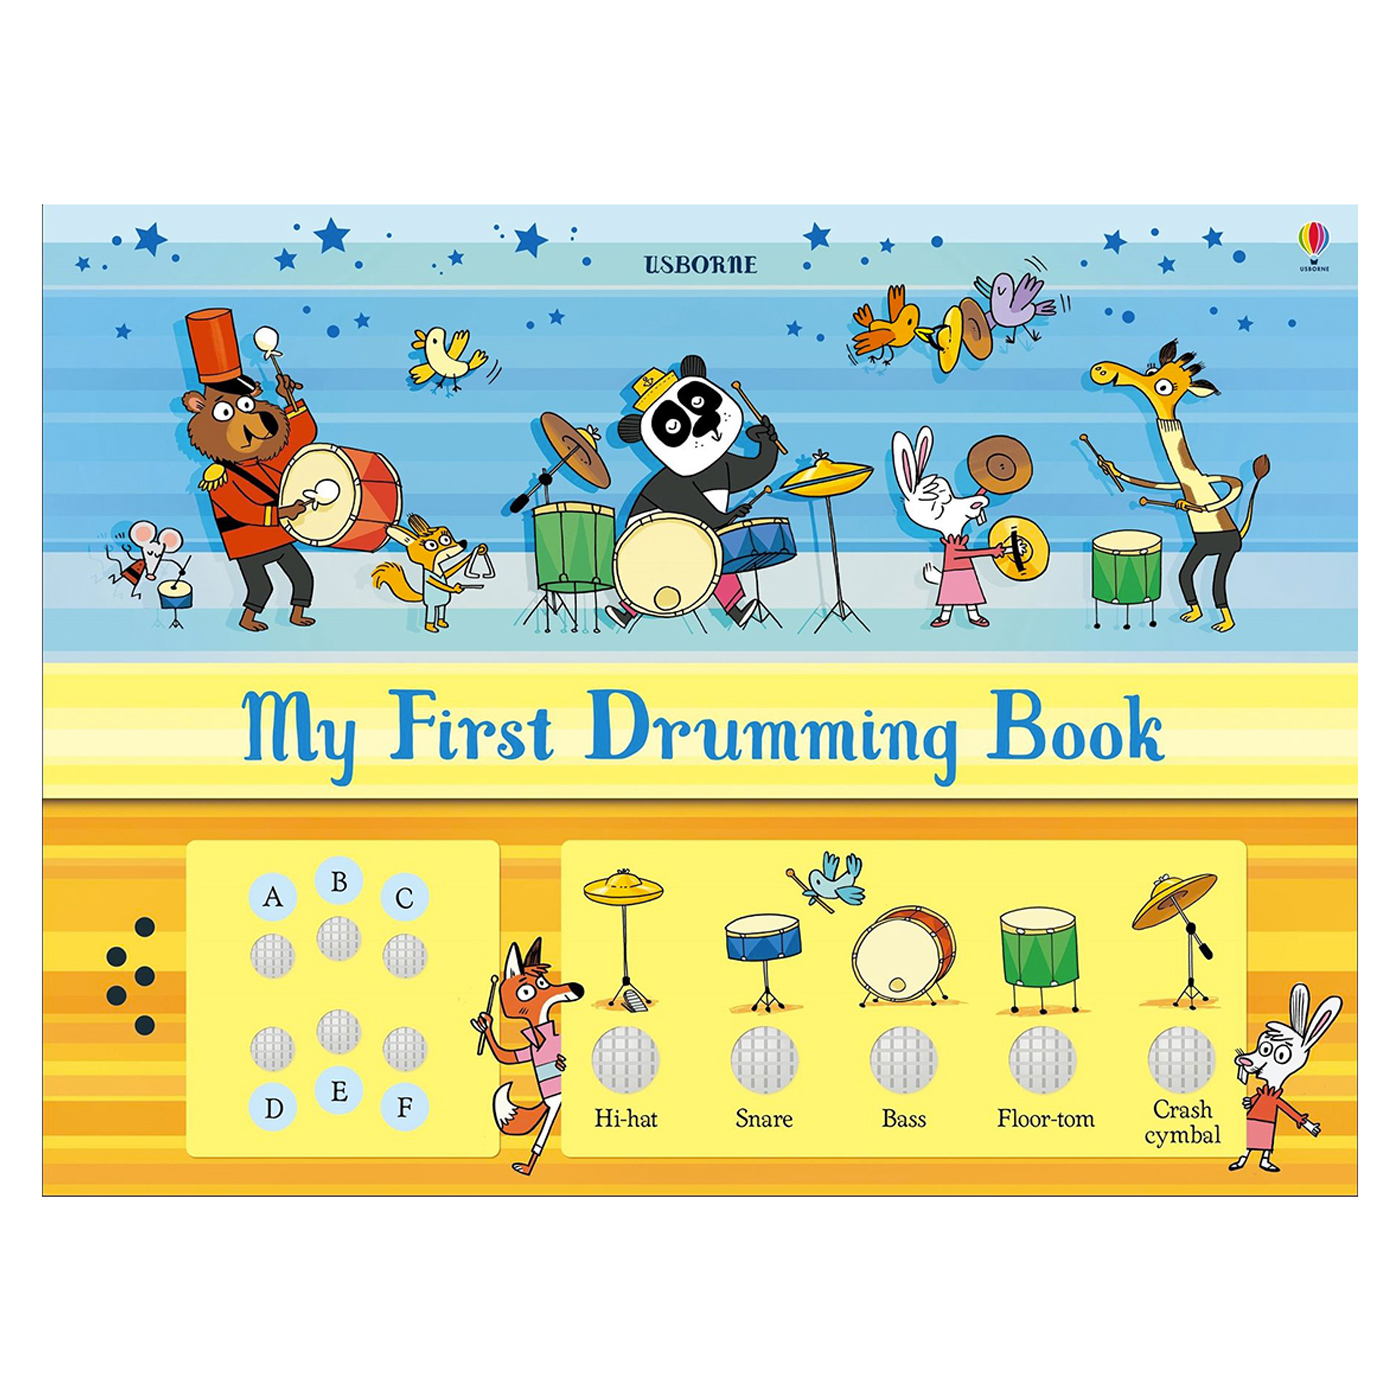  My First Drumming Book